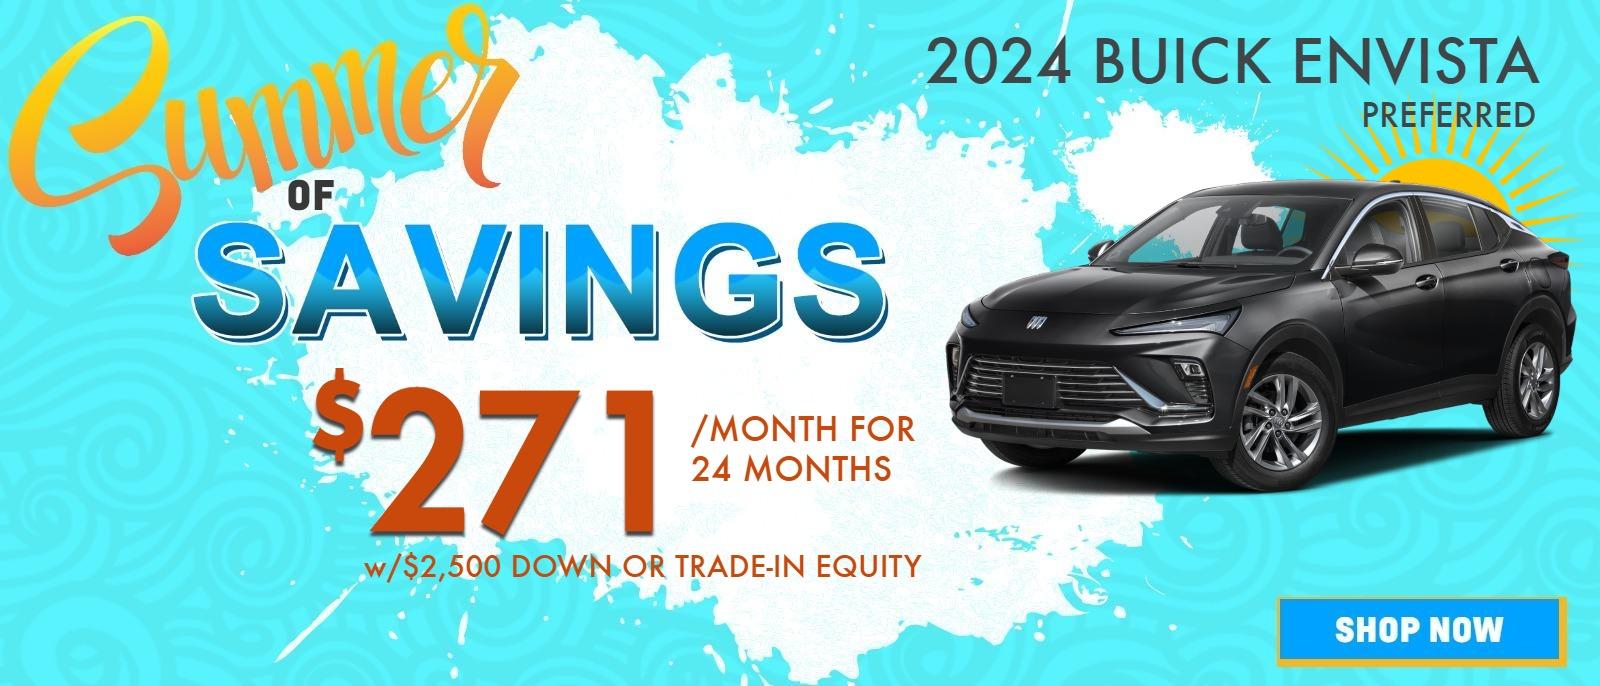 LEASE A 2024 ENVISTA PREFERRED FOR $271 PER MONTH FOR 24 MONTHS FROM MIKE YOUNG BUICK GMC IN FRANKENMUTH, MI